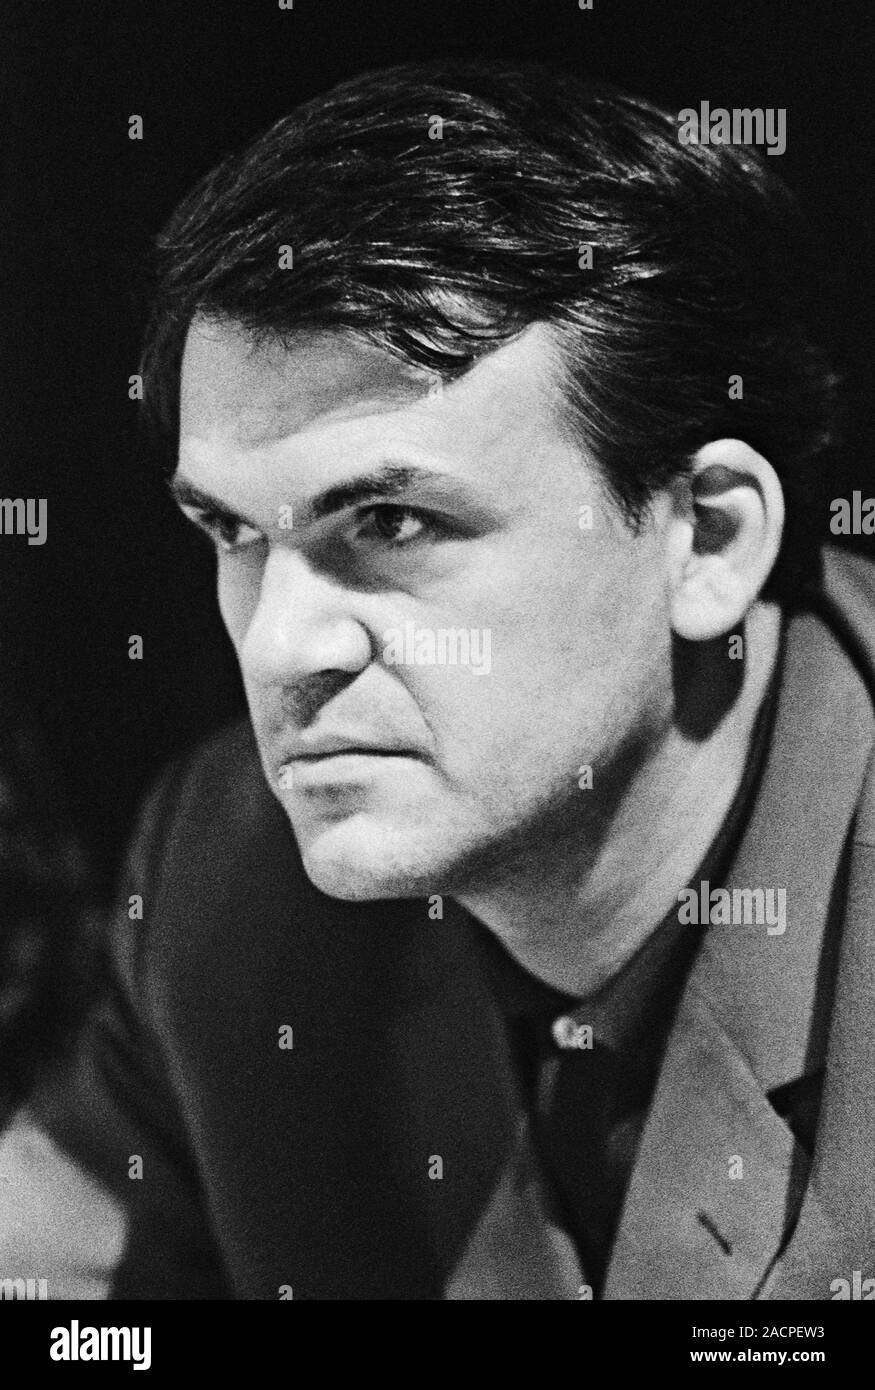 ***FILE PHOTO*** Milan Kundera, a Czech-born author living in France, has regained Czech citizenship after 40 years, daily Pravo writes on December 3, 2019, adding that Czech ambassador Petr Drulak handed the relevant document to him in his Paris apartment on November 28. ORIGINAL CAPTION: Writer Milan Kundera attends the 4th congress of the Czechoslovak Writers' Union in Prague, Czech Republic, on June 27, 1967. (CTK Photo/Jovan Dezort) Stock Photo